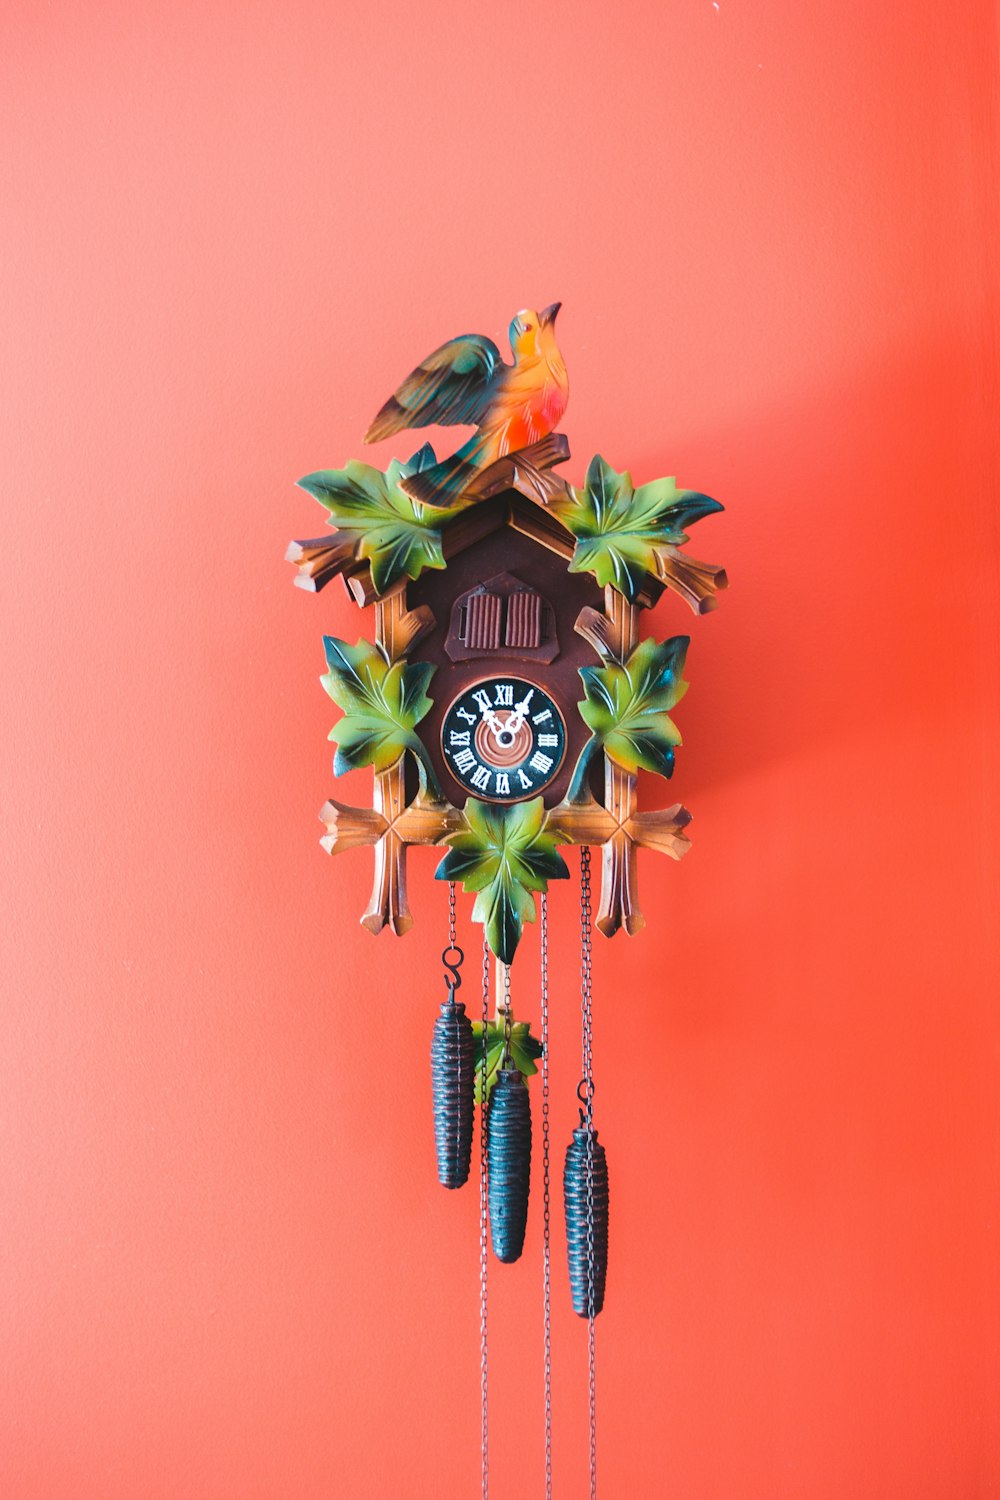 multicolored cuckoo clock on red wall